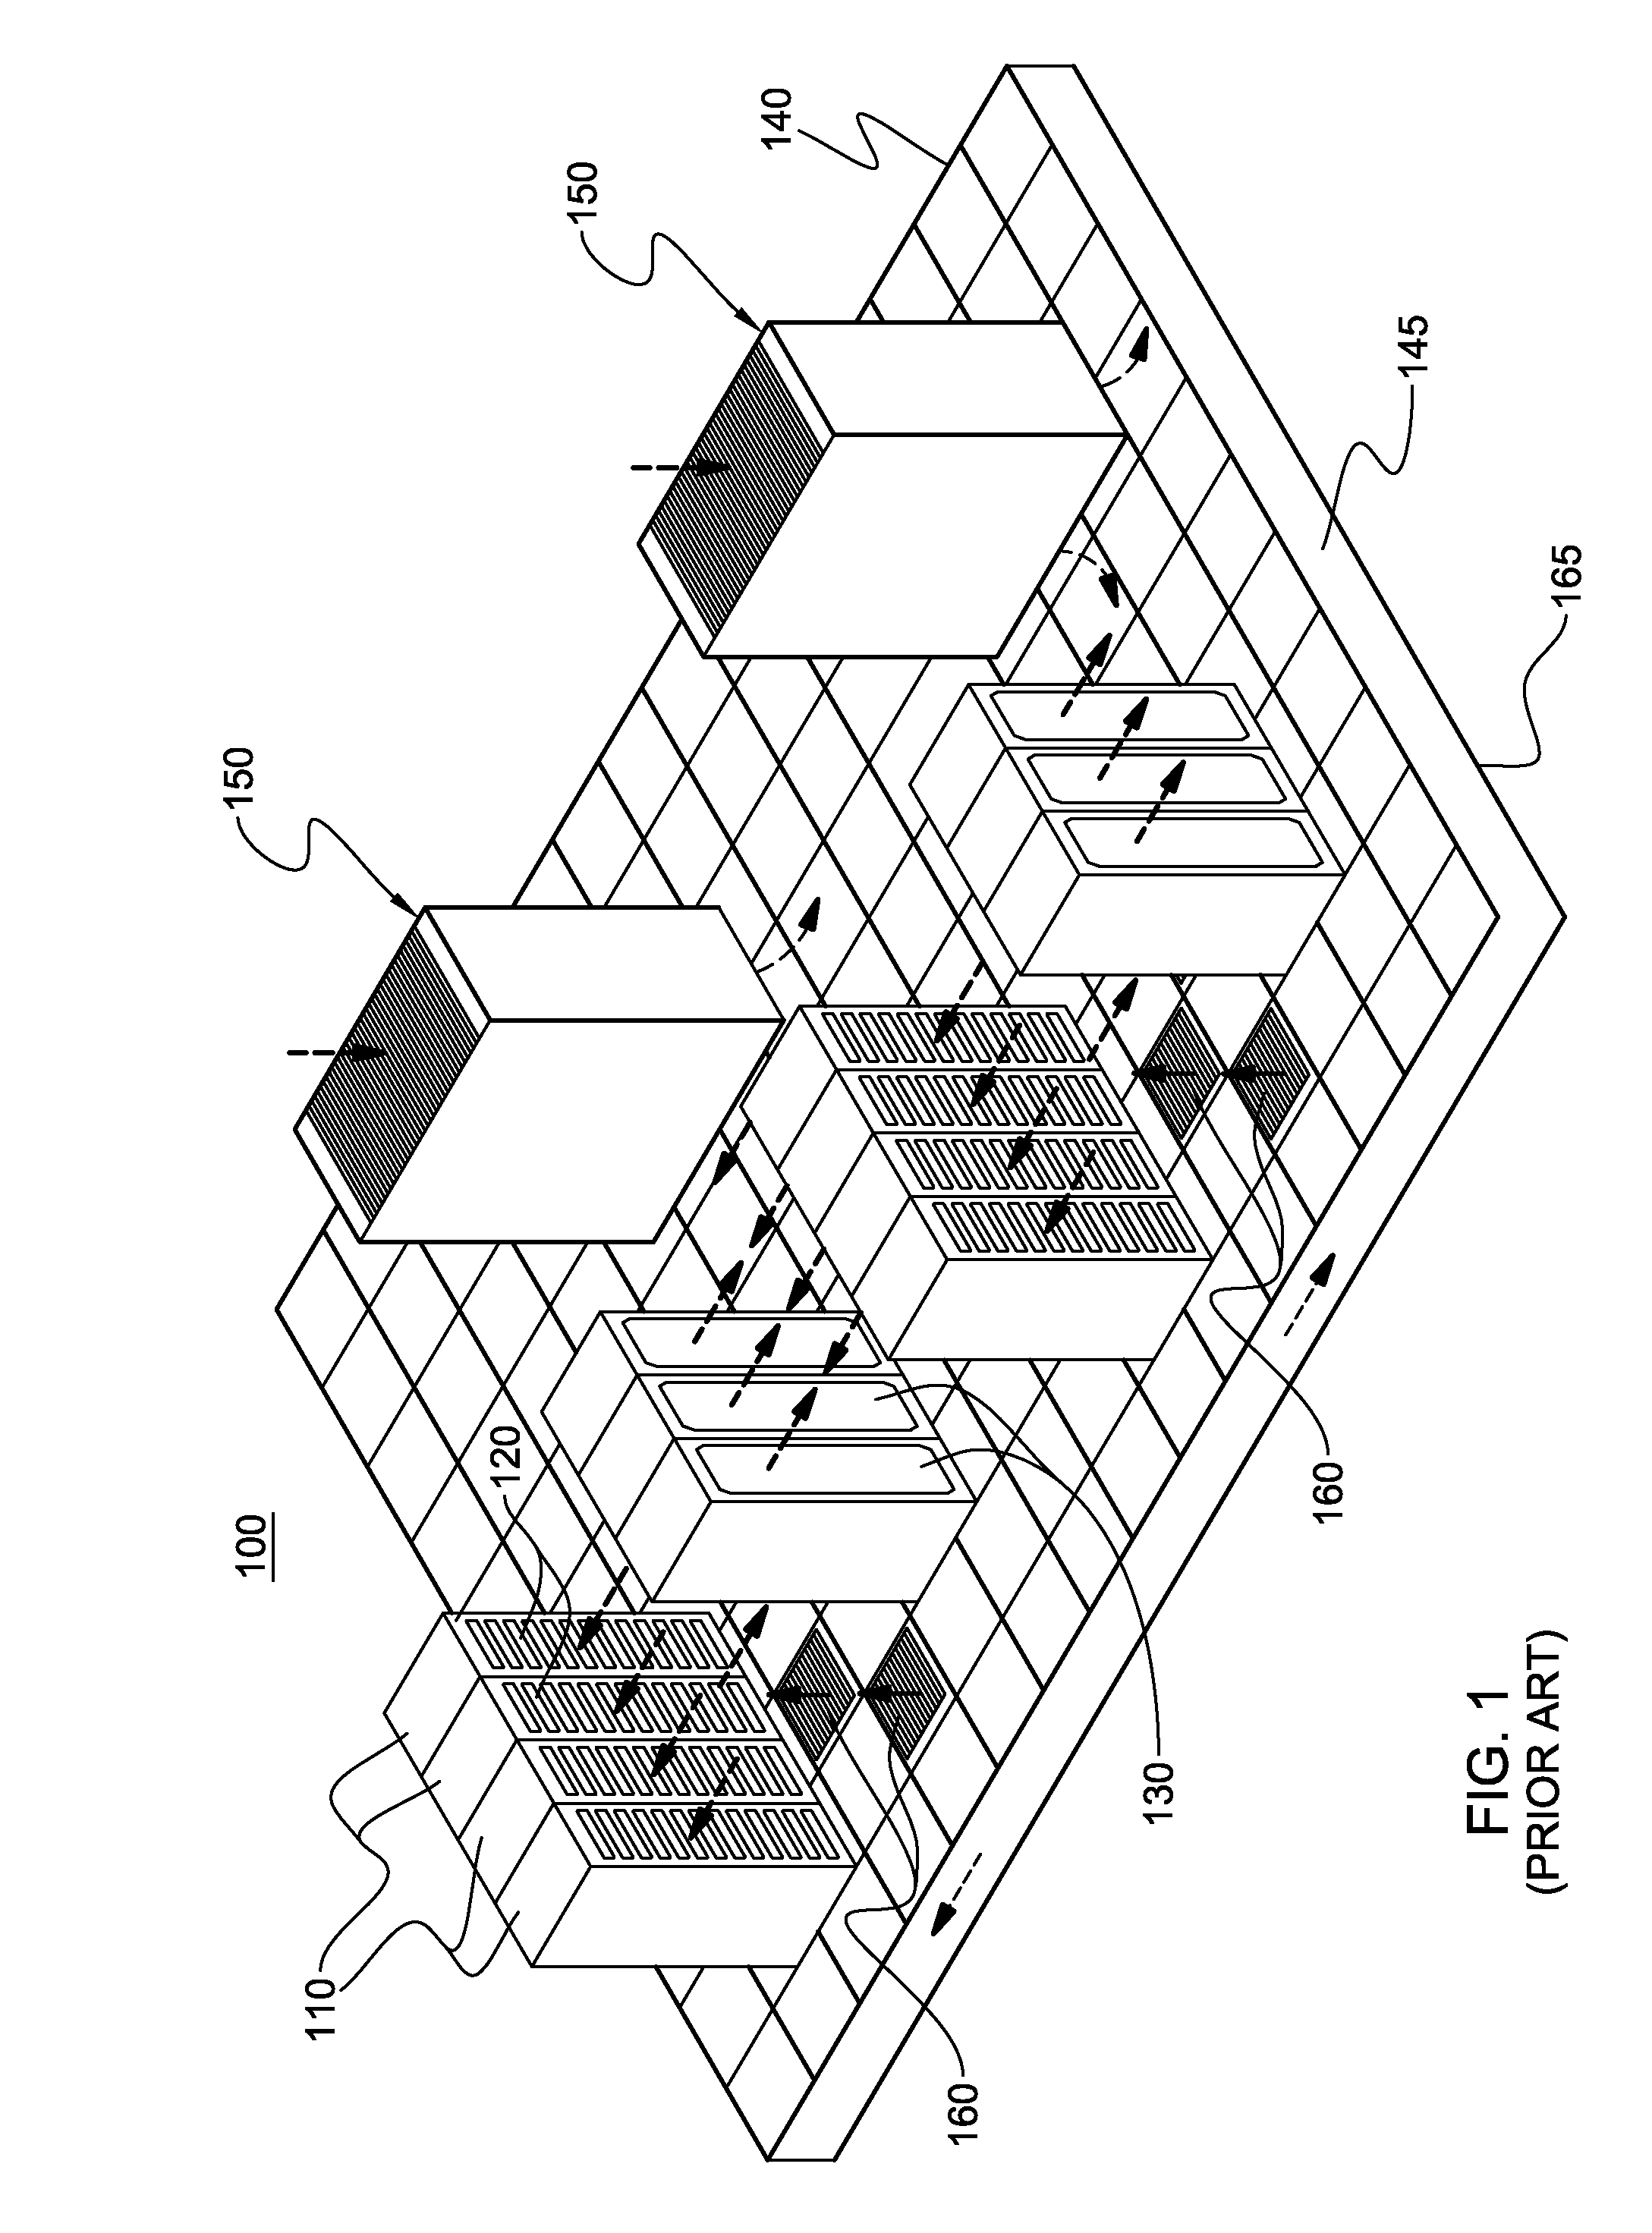 Condenser block structures with cavities facilitating vapor condensation cooling of coolant